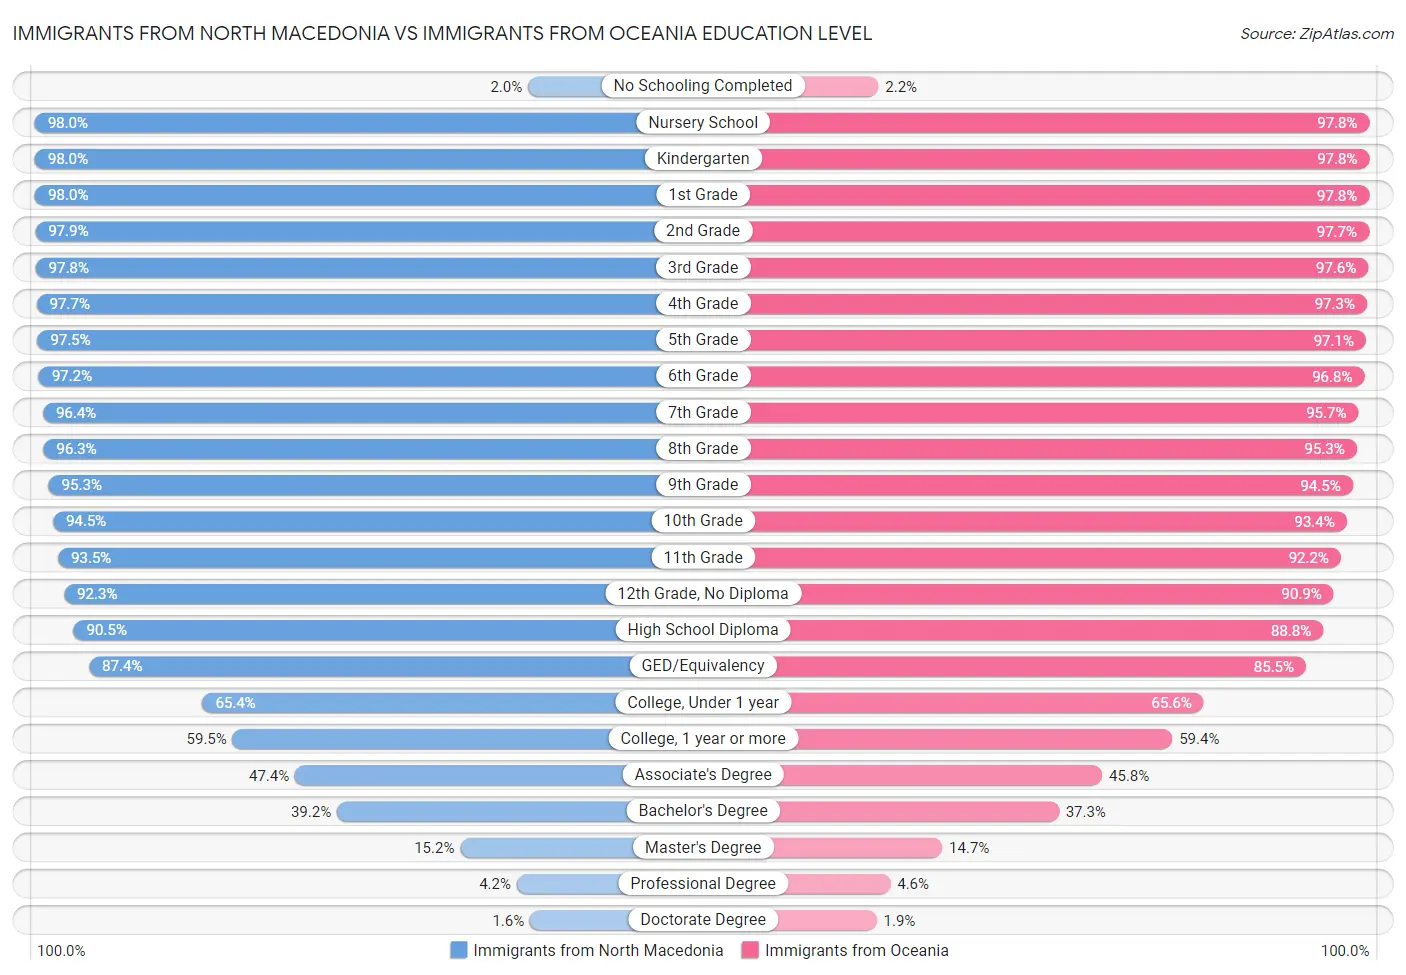 Immigrants from North Macedonia vs Immigrants from Oceania Education Level